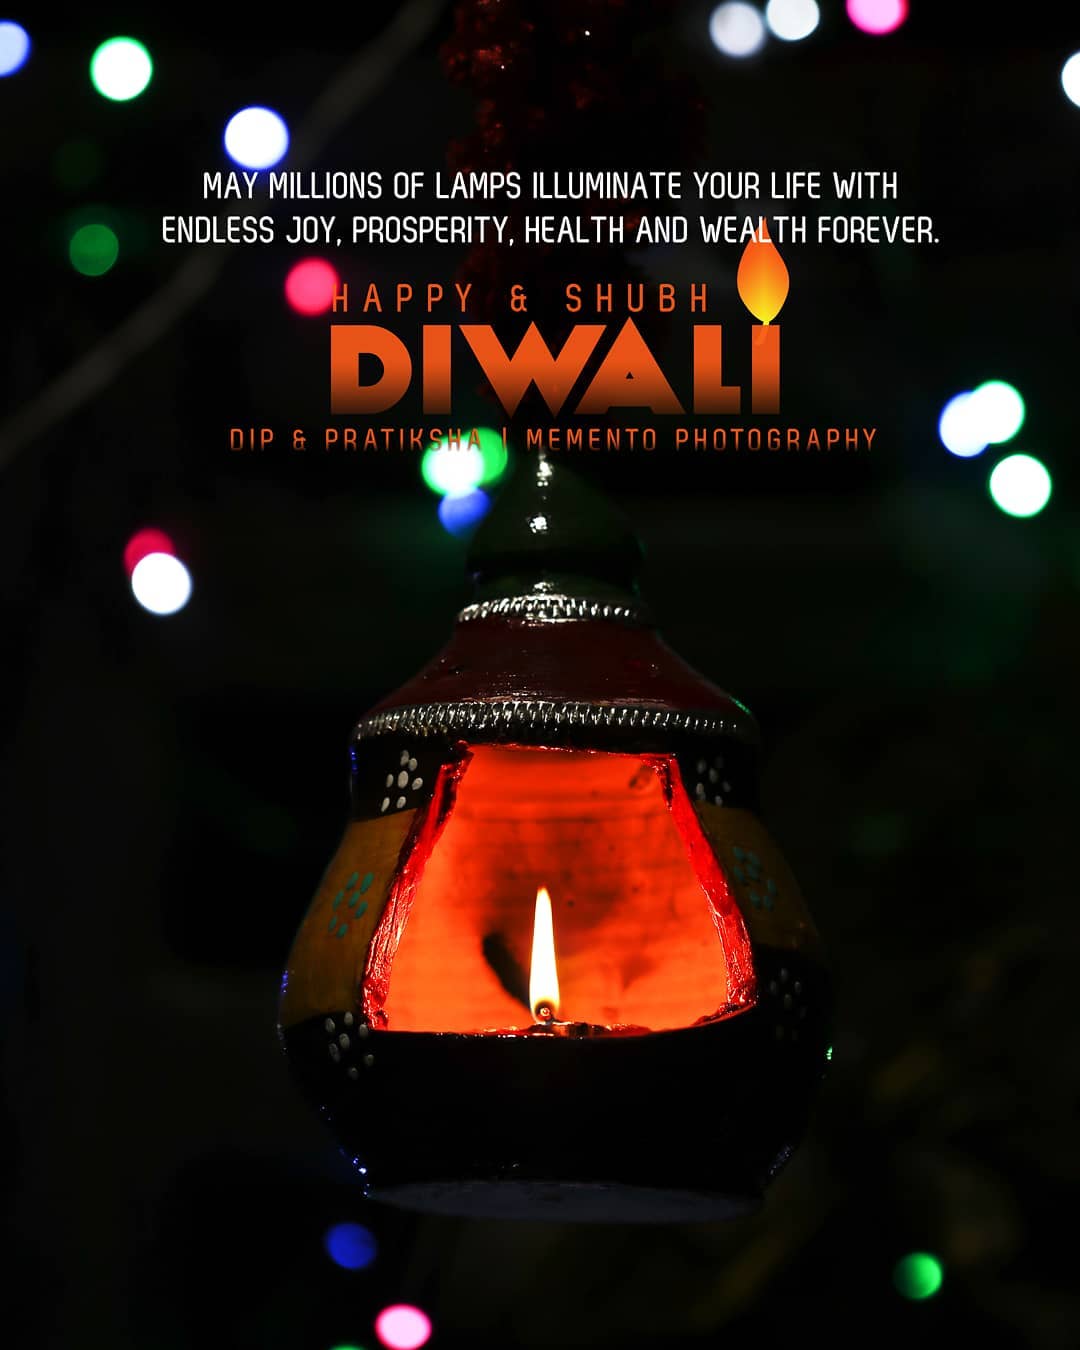 May millions of lamps illuminate your life with endless Joy, Prosperity, Health and Wealth forever. *Happy & Shubh Diwali.* From Dip & Pratiksha 
Memento Photography.